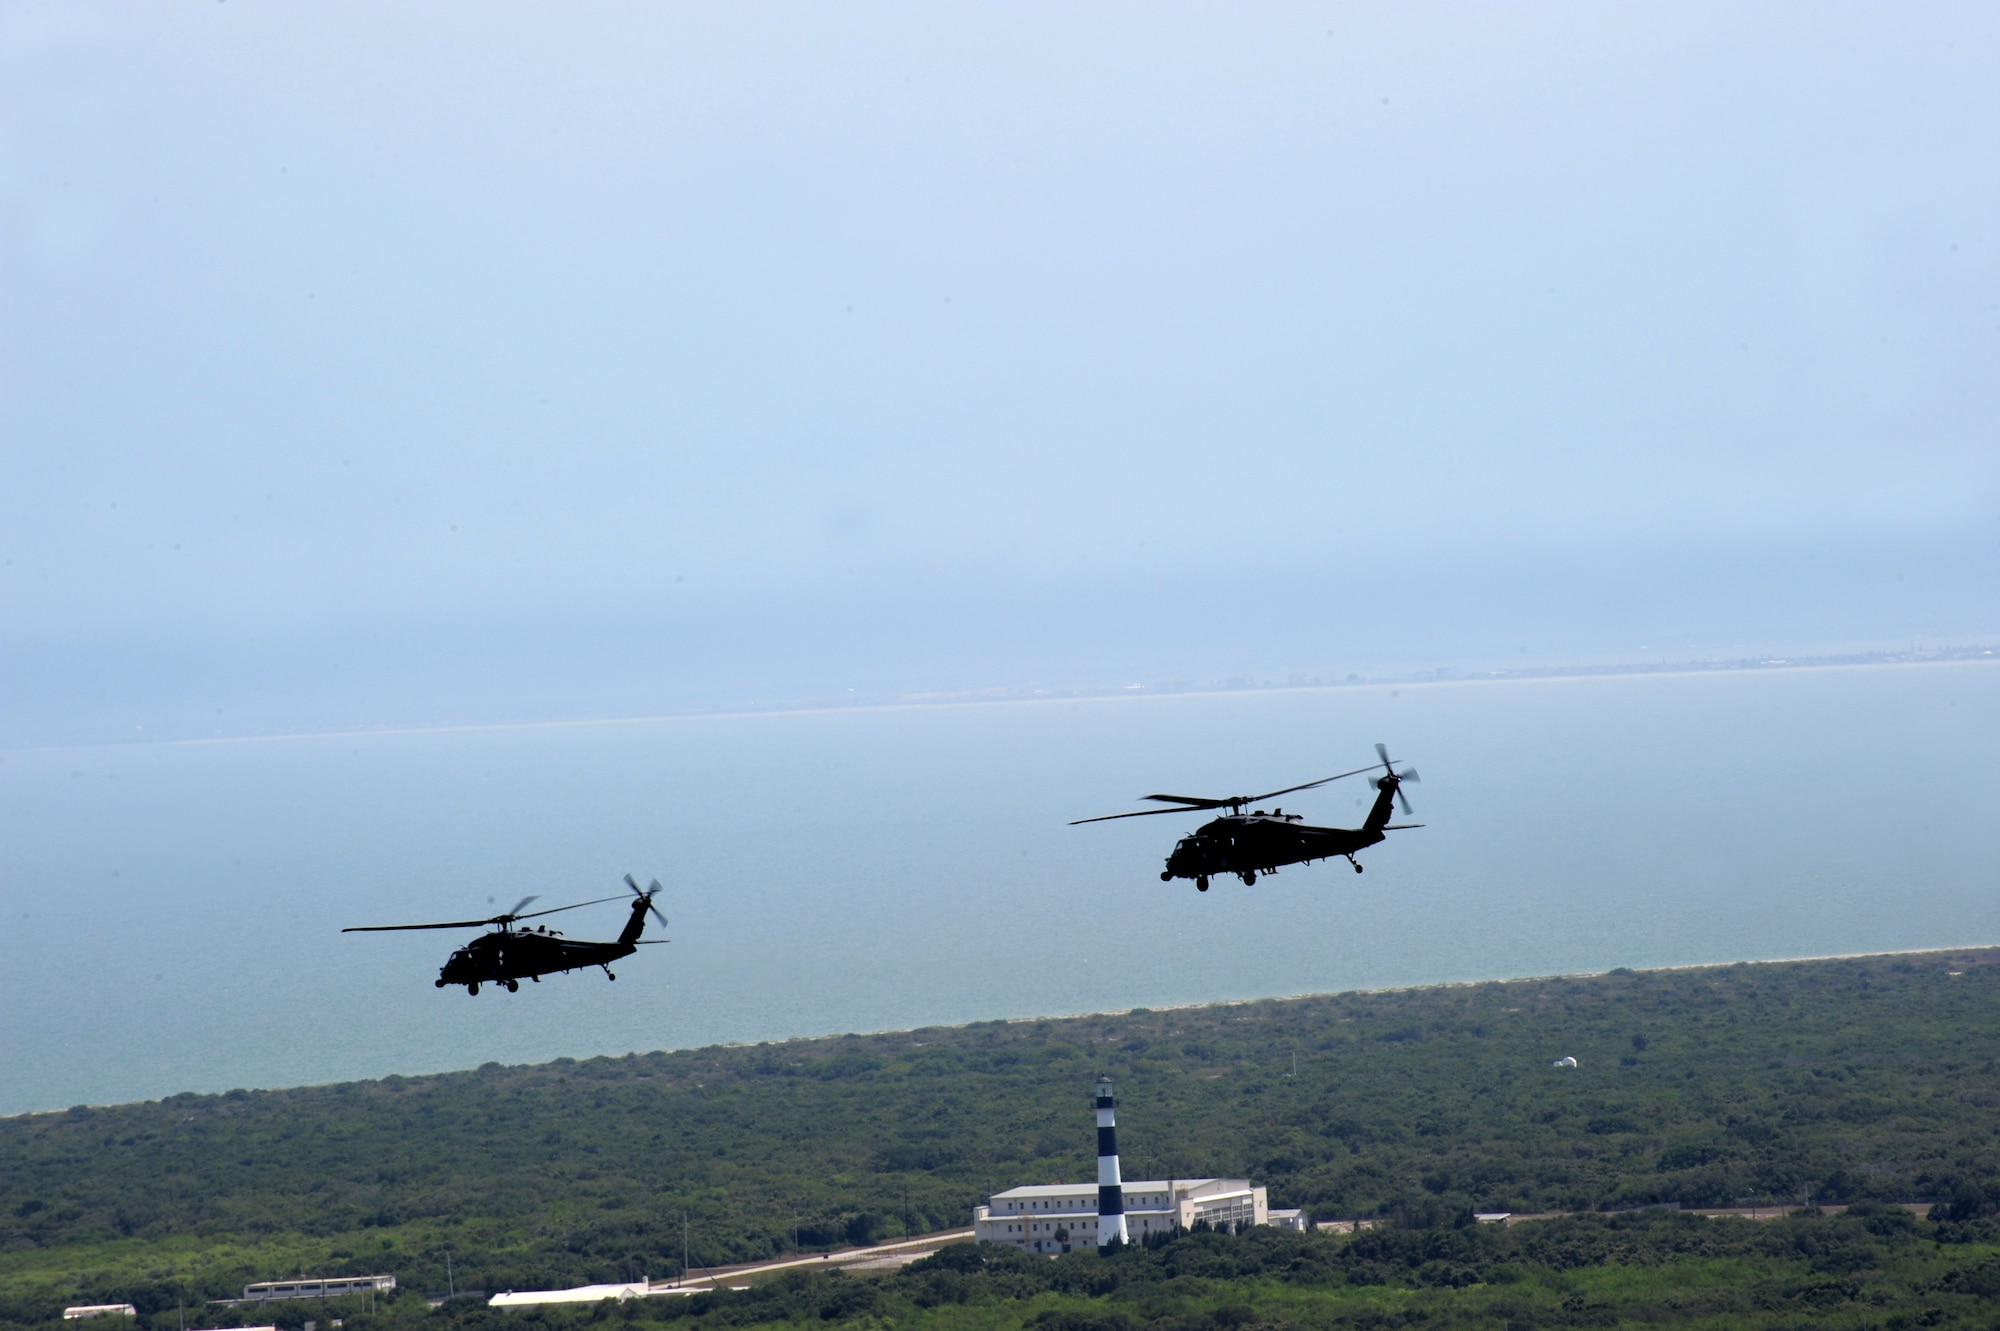 PATRICK AIR FORCE BASE, Fla. - From two to four HH-60G Pave Hawks piloted by Air Force Reservists of the 920th Rescue Wing here support every manned and unmanned rocket launch from Florida's spaceport. Seen here, the two helicopters race by the historic lighthouse over Cape Canaveral Air Force Station prior to launch support. (U.S. Air Force Photo/Tech. Sgt. Gillian M. Albro)